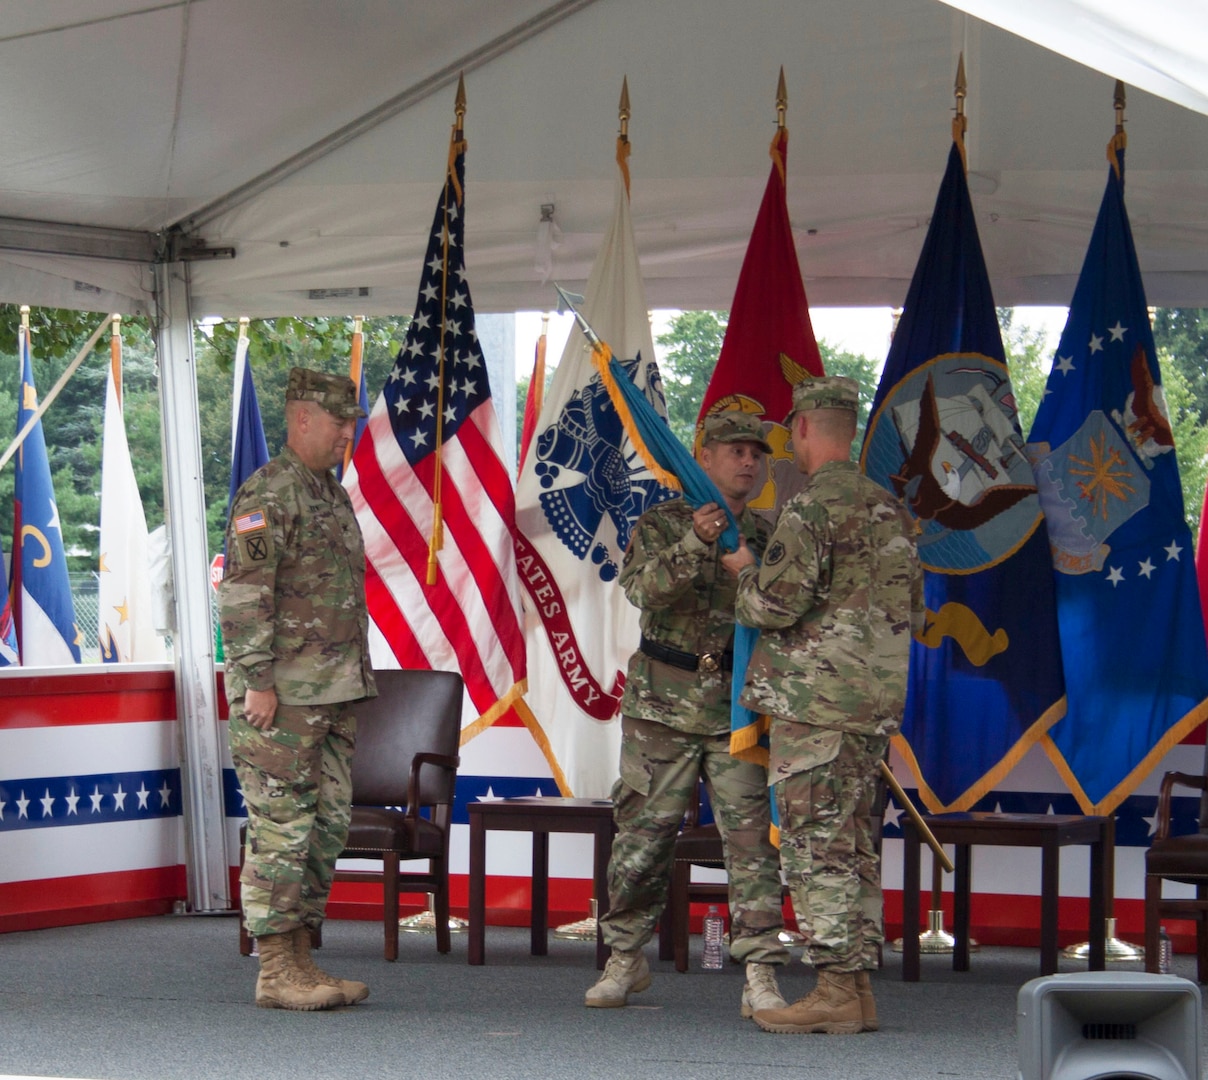 DLA Distribution commander, Army Brig. Gen. John S. Laskodi passes the flag to the new DLA Distribution Susquehanna commander, Army Col. Brad J. Eungard in the change of command ceremony on Aug. 5.